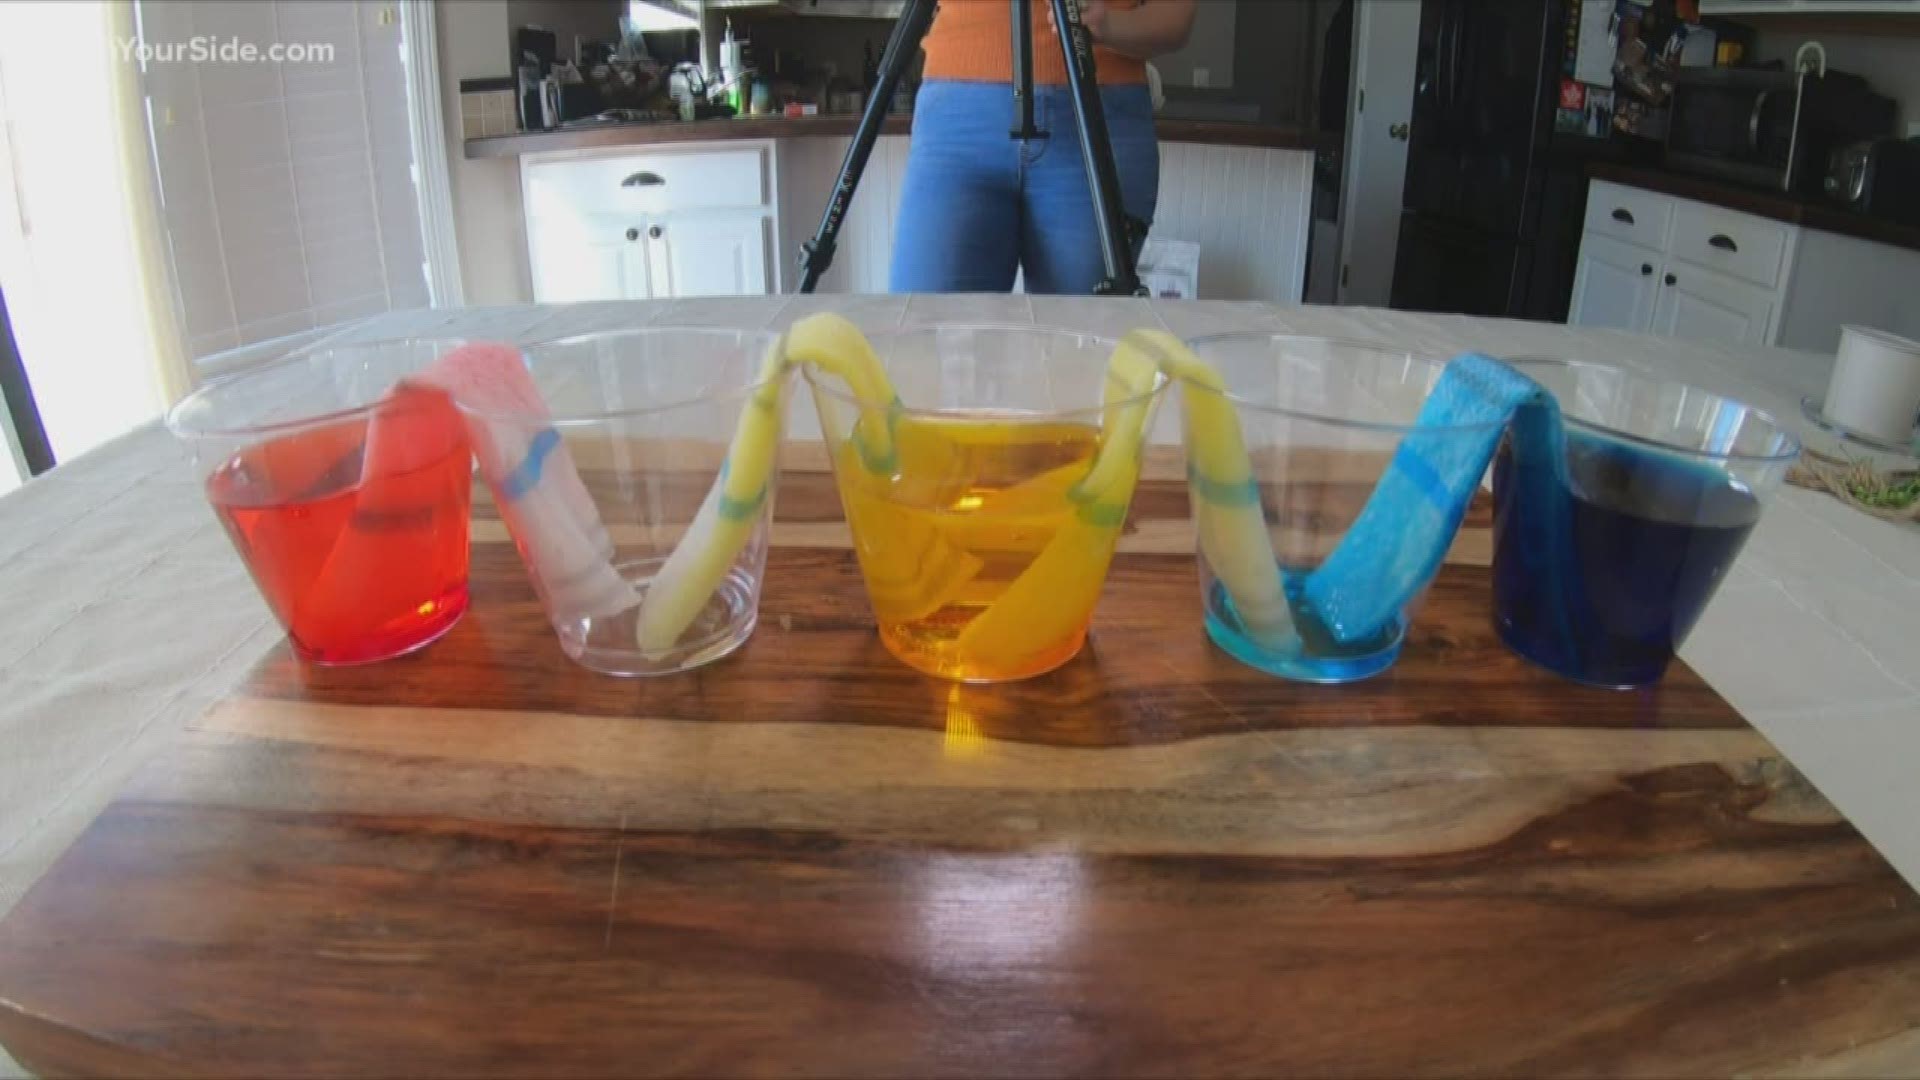 With water, paper towel and a few cups, you can watch water on the move.